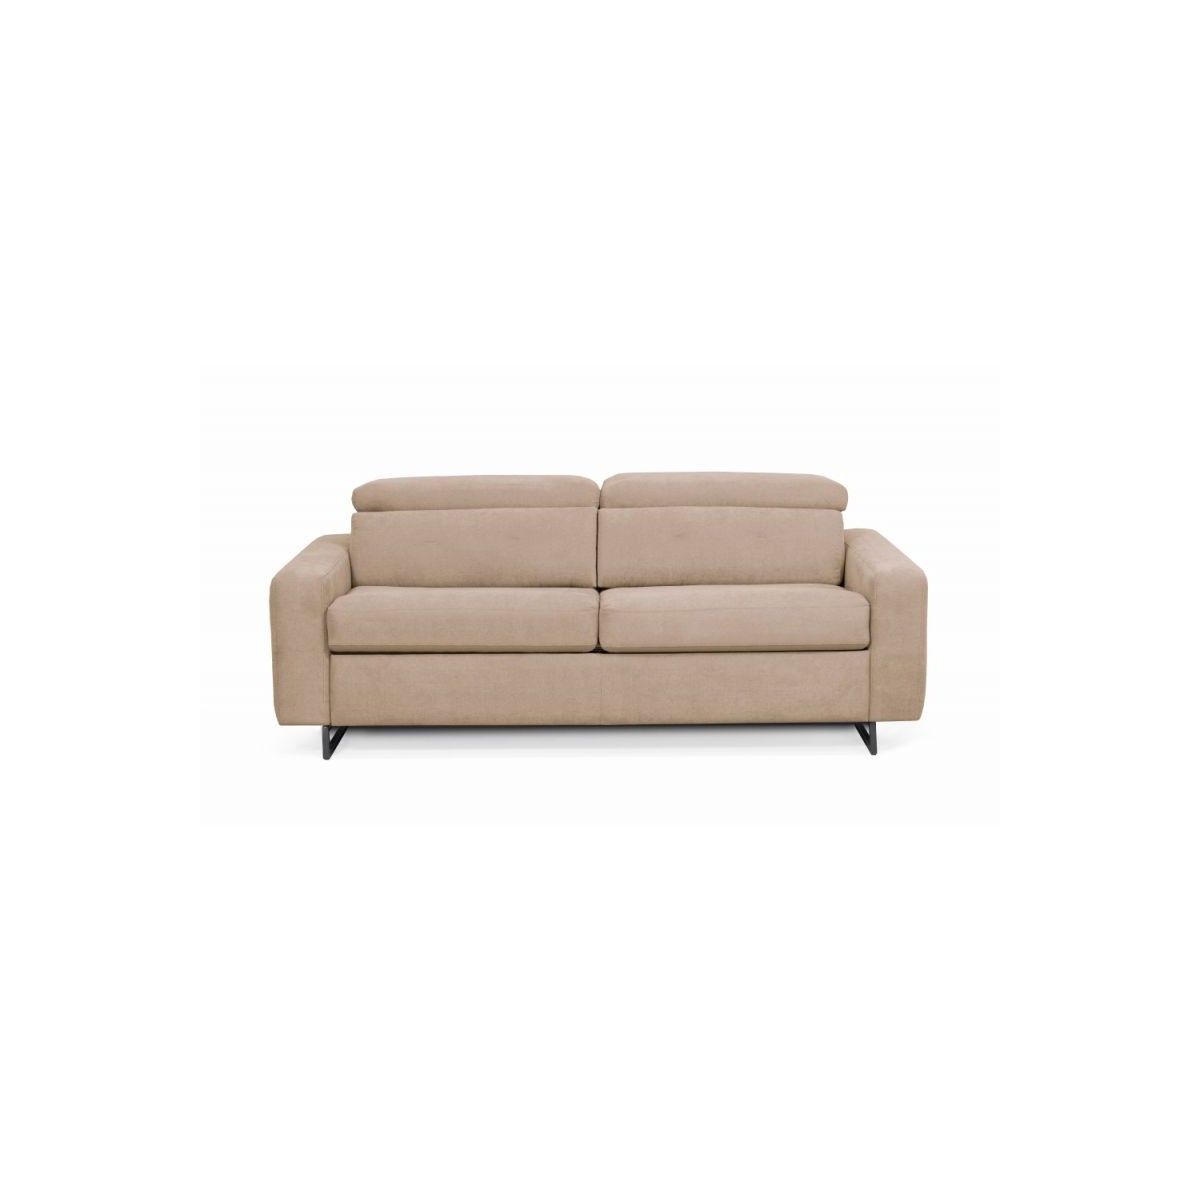 Sofa Bed 3 Places Fabric Mina (beige) – Amp Story 8691 Pertaining To 8 Seat Convertible Sofas (View 12 of 15)